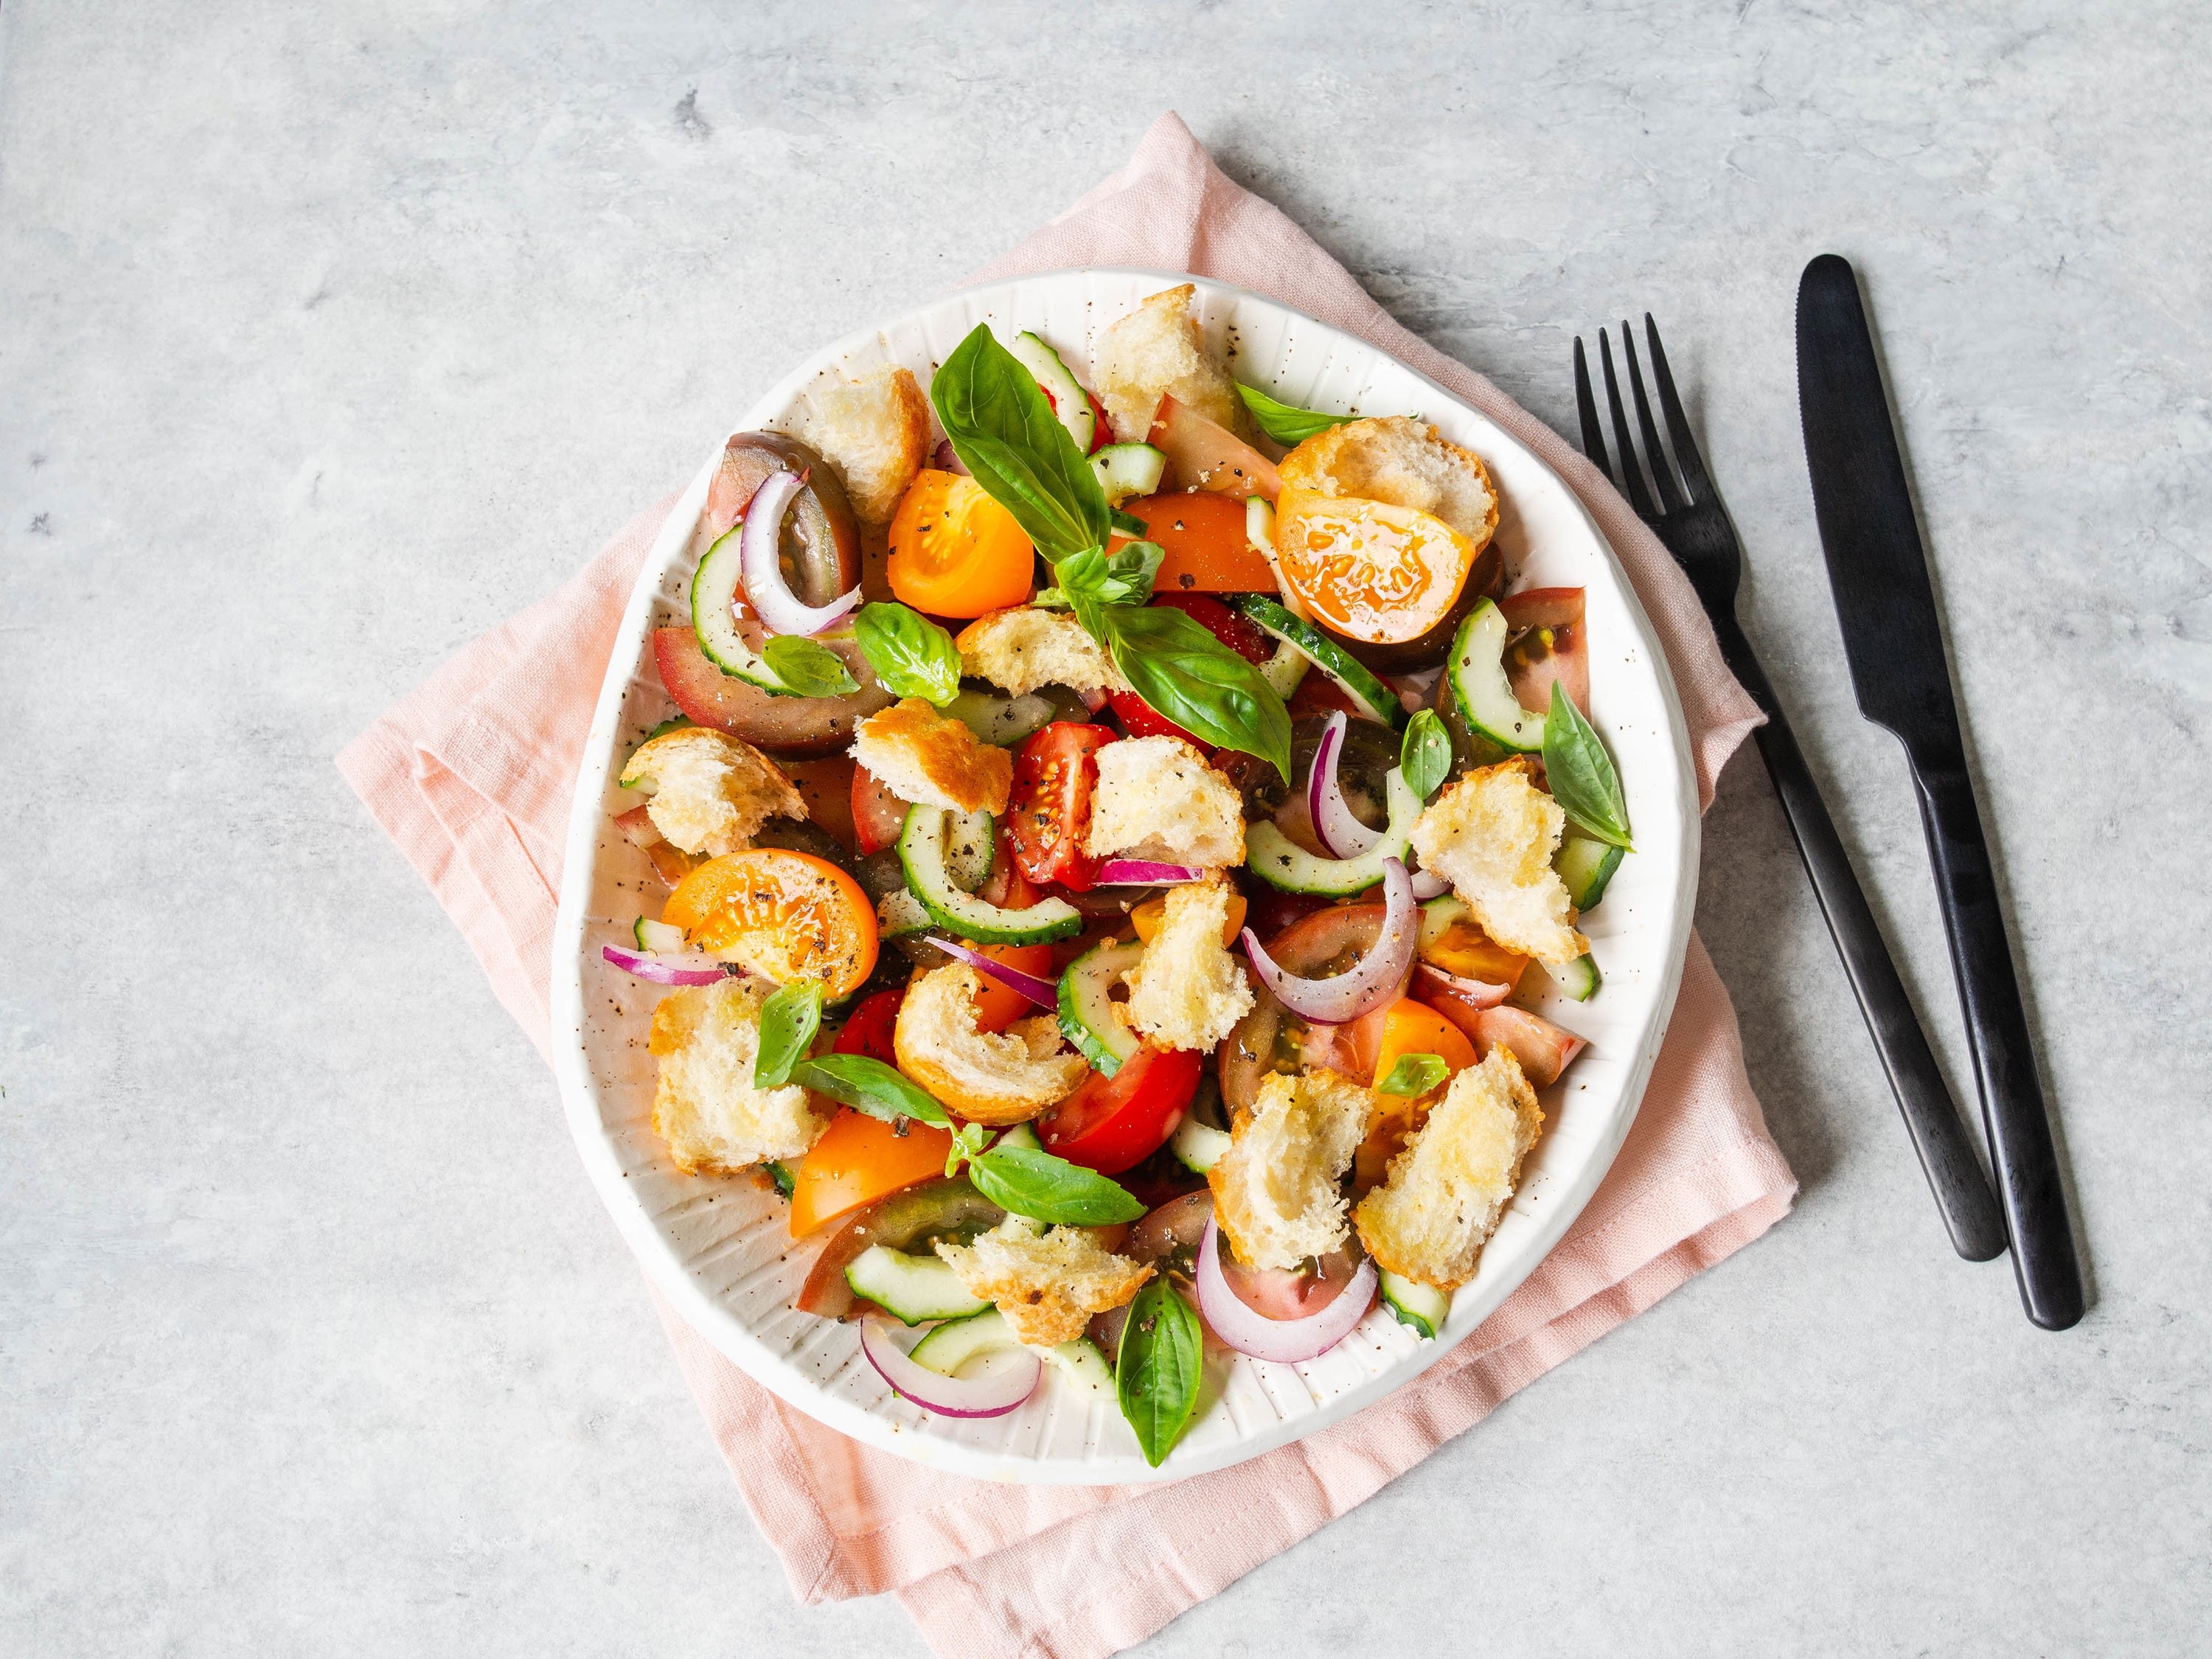 Panzanella salad with the addition of onions. (Shutterstock Photo)